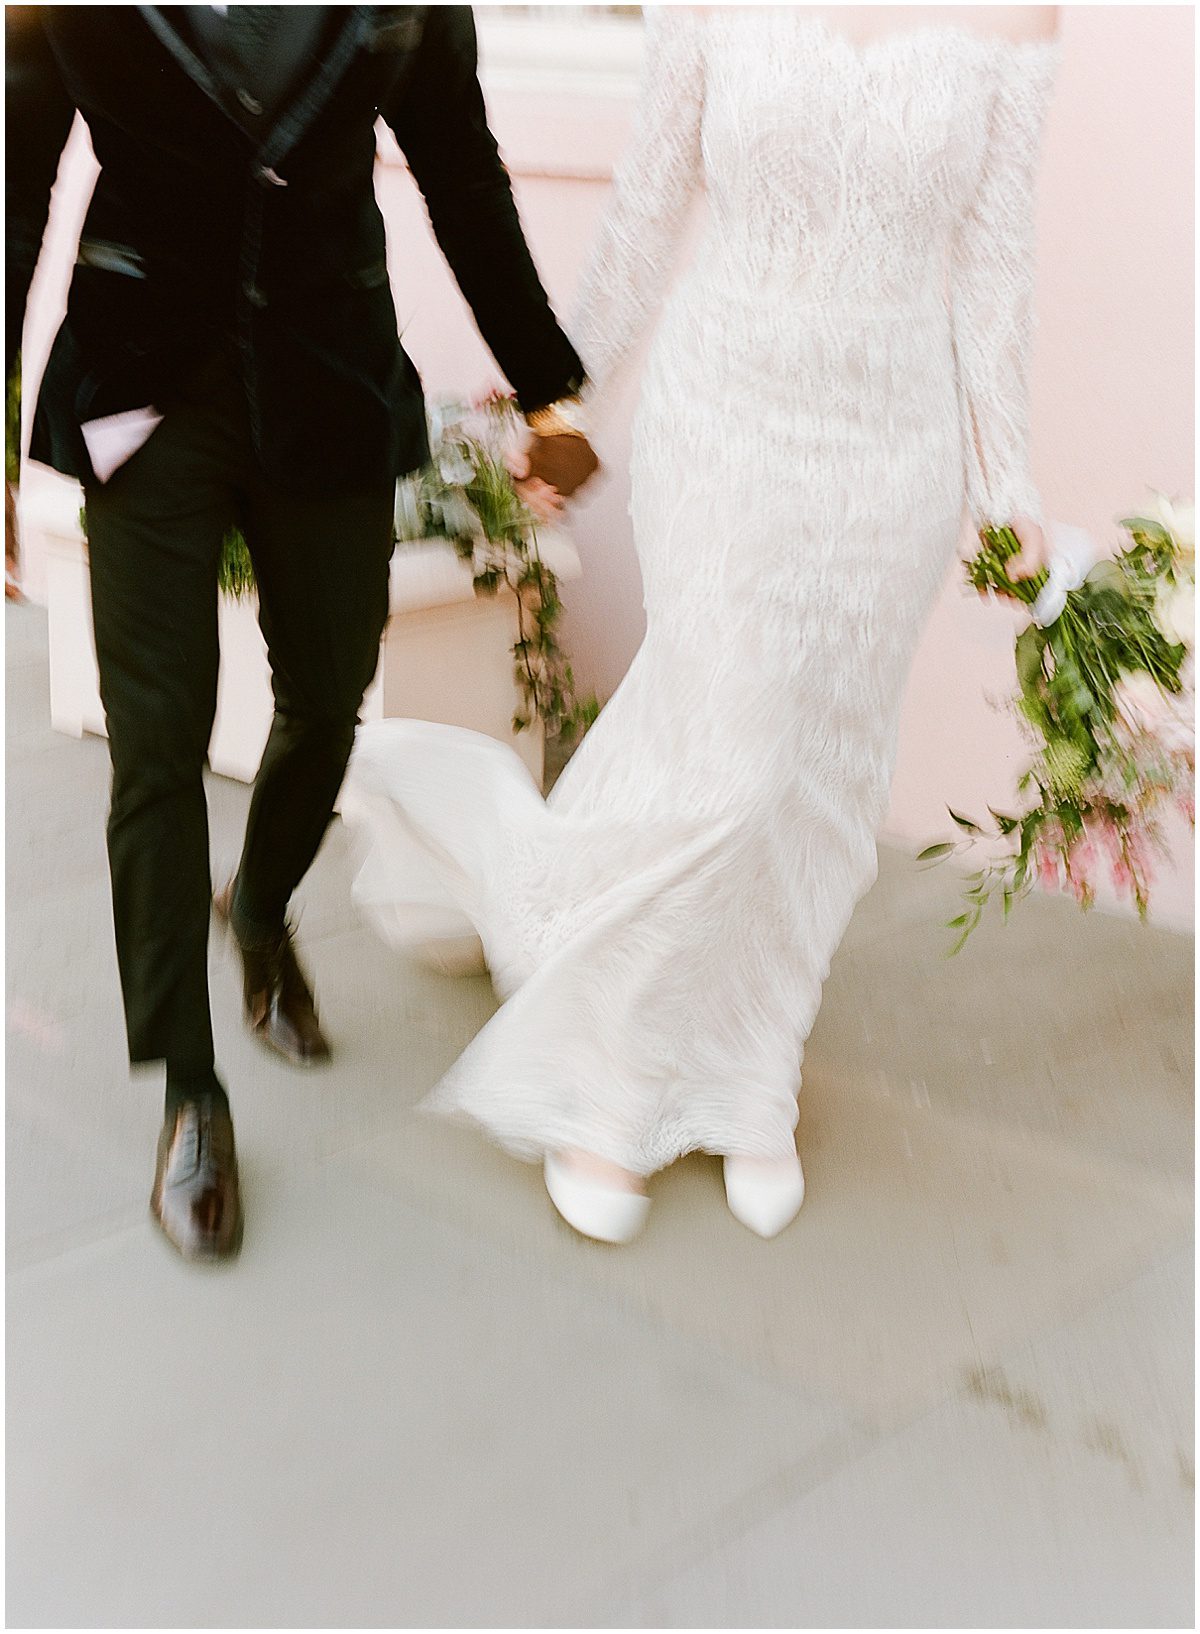 Bride and Groom Walking Holding Hands Blurry Photo